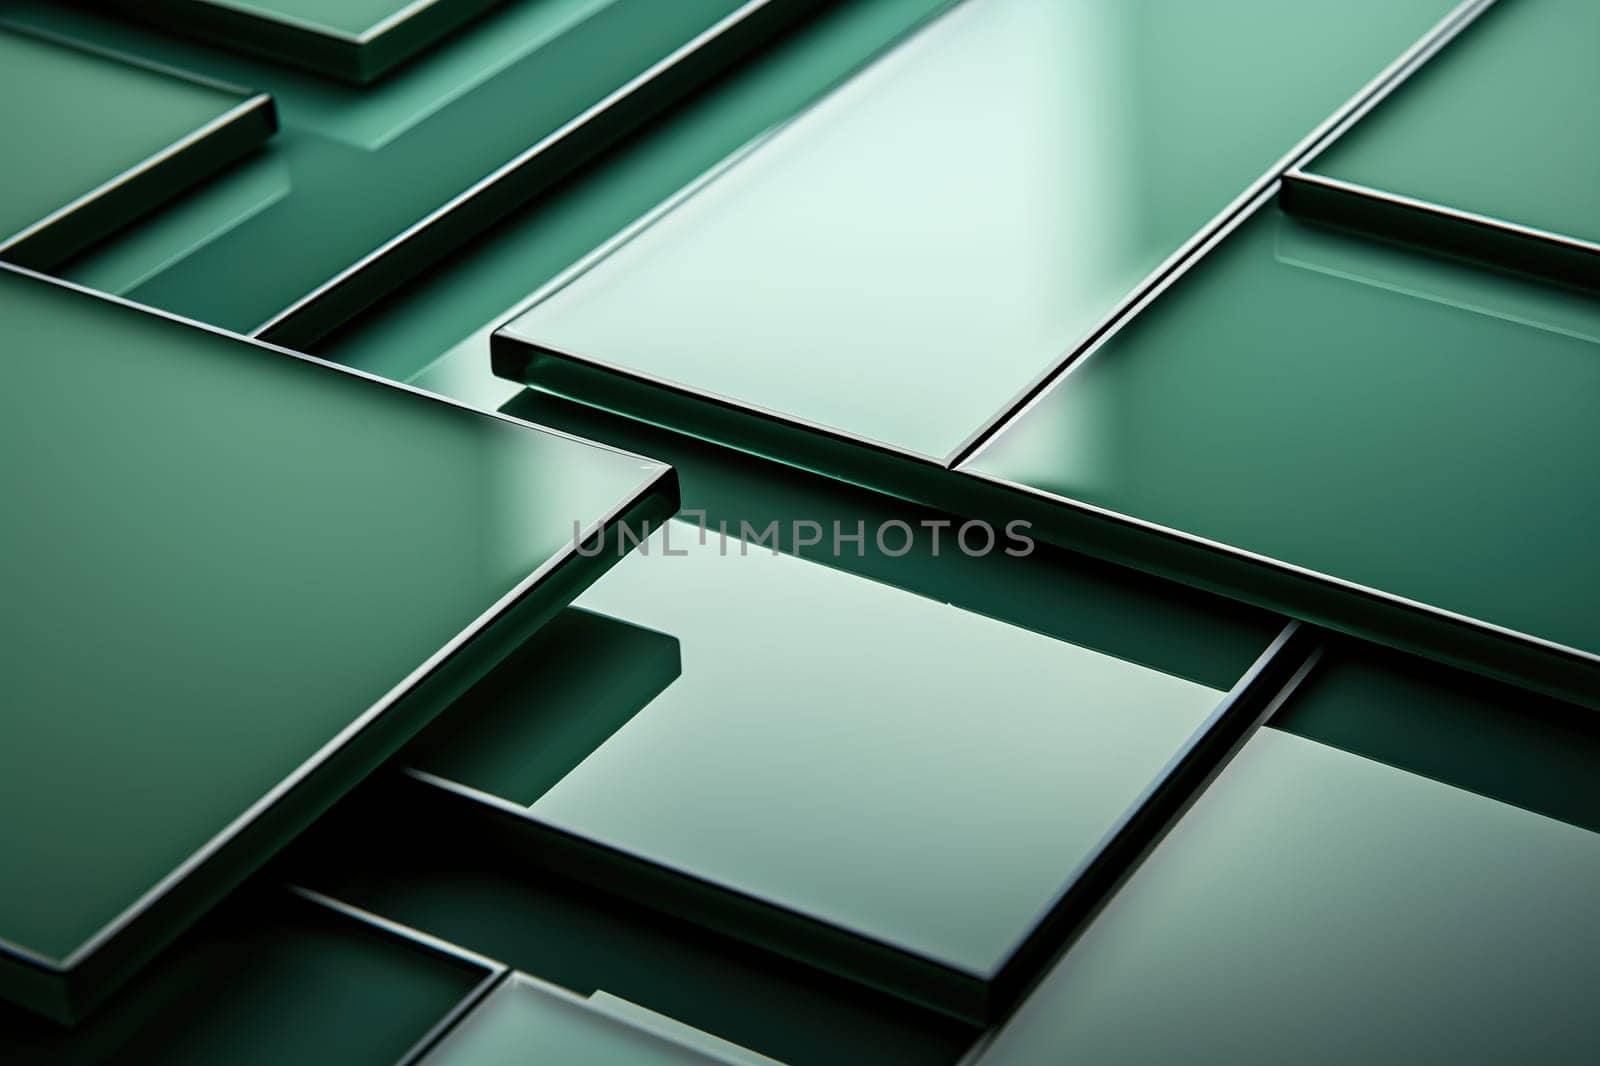 Abstract stylish green, turquoise geometric background.